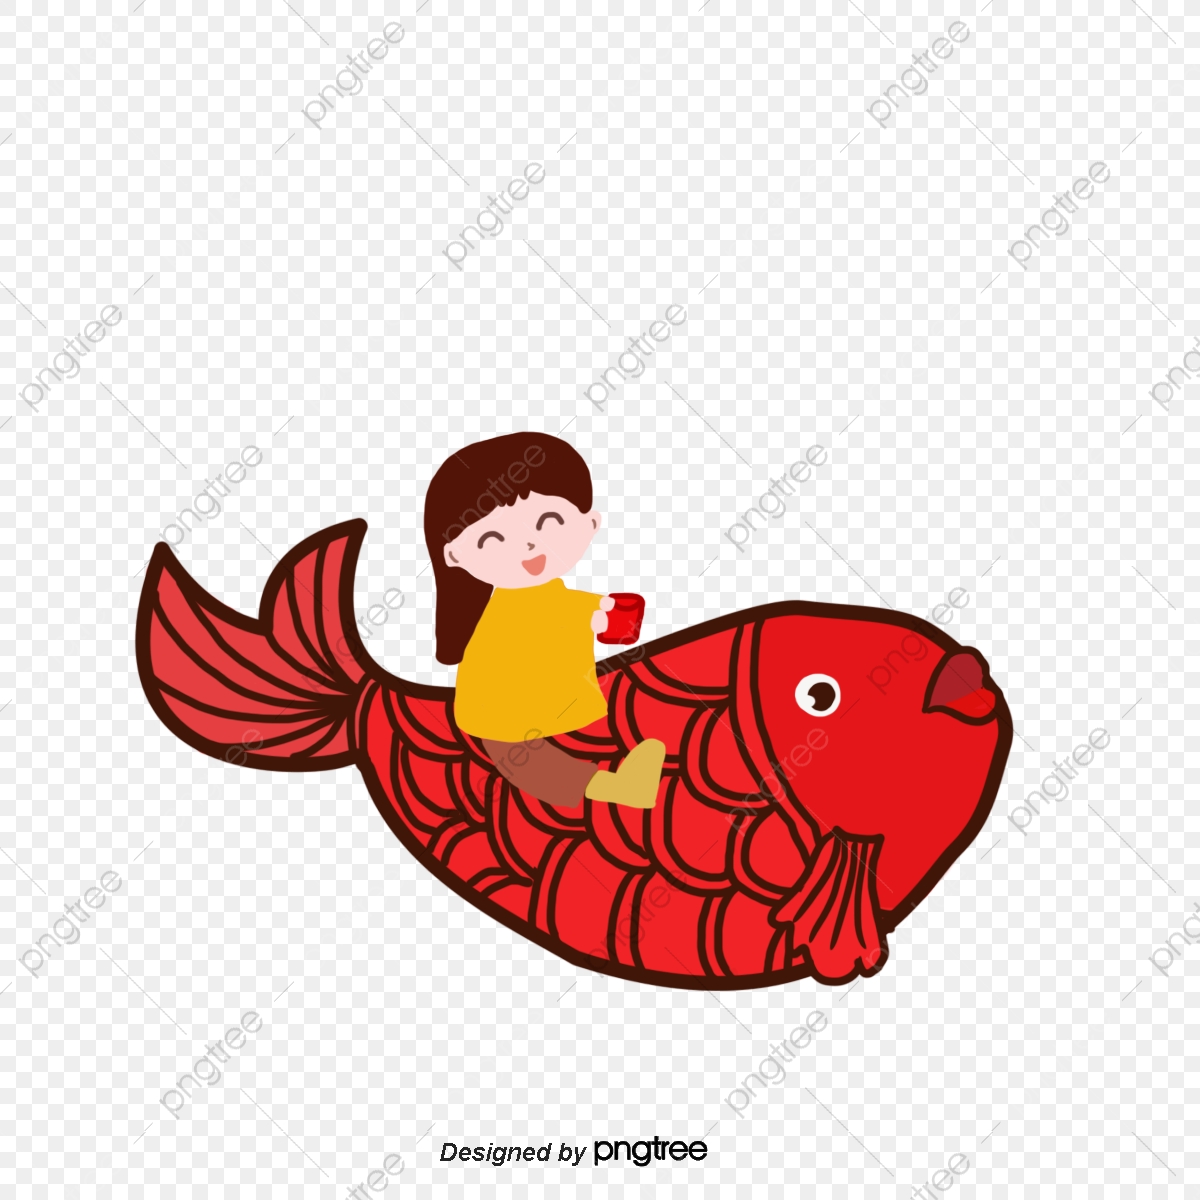 Fish clipart spring. Festival girl and red